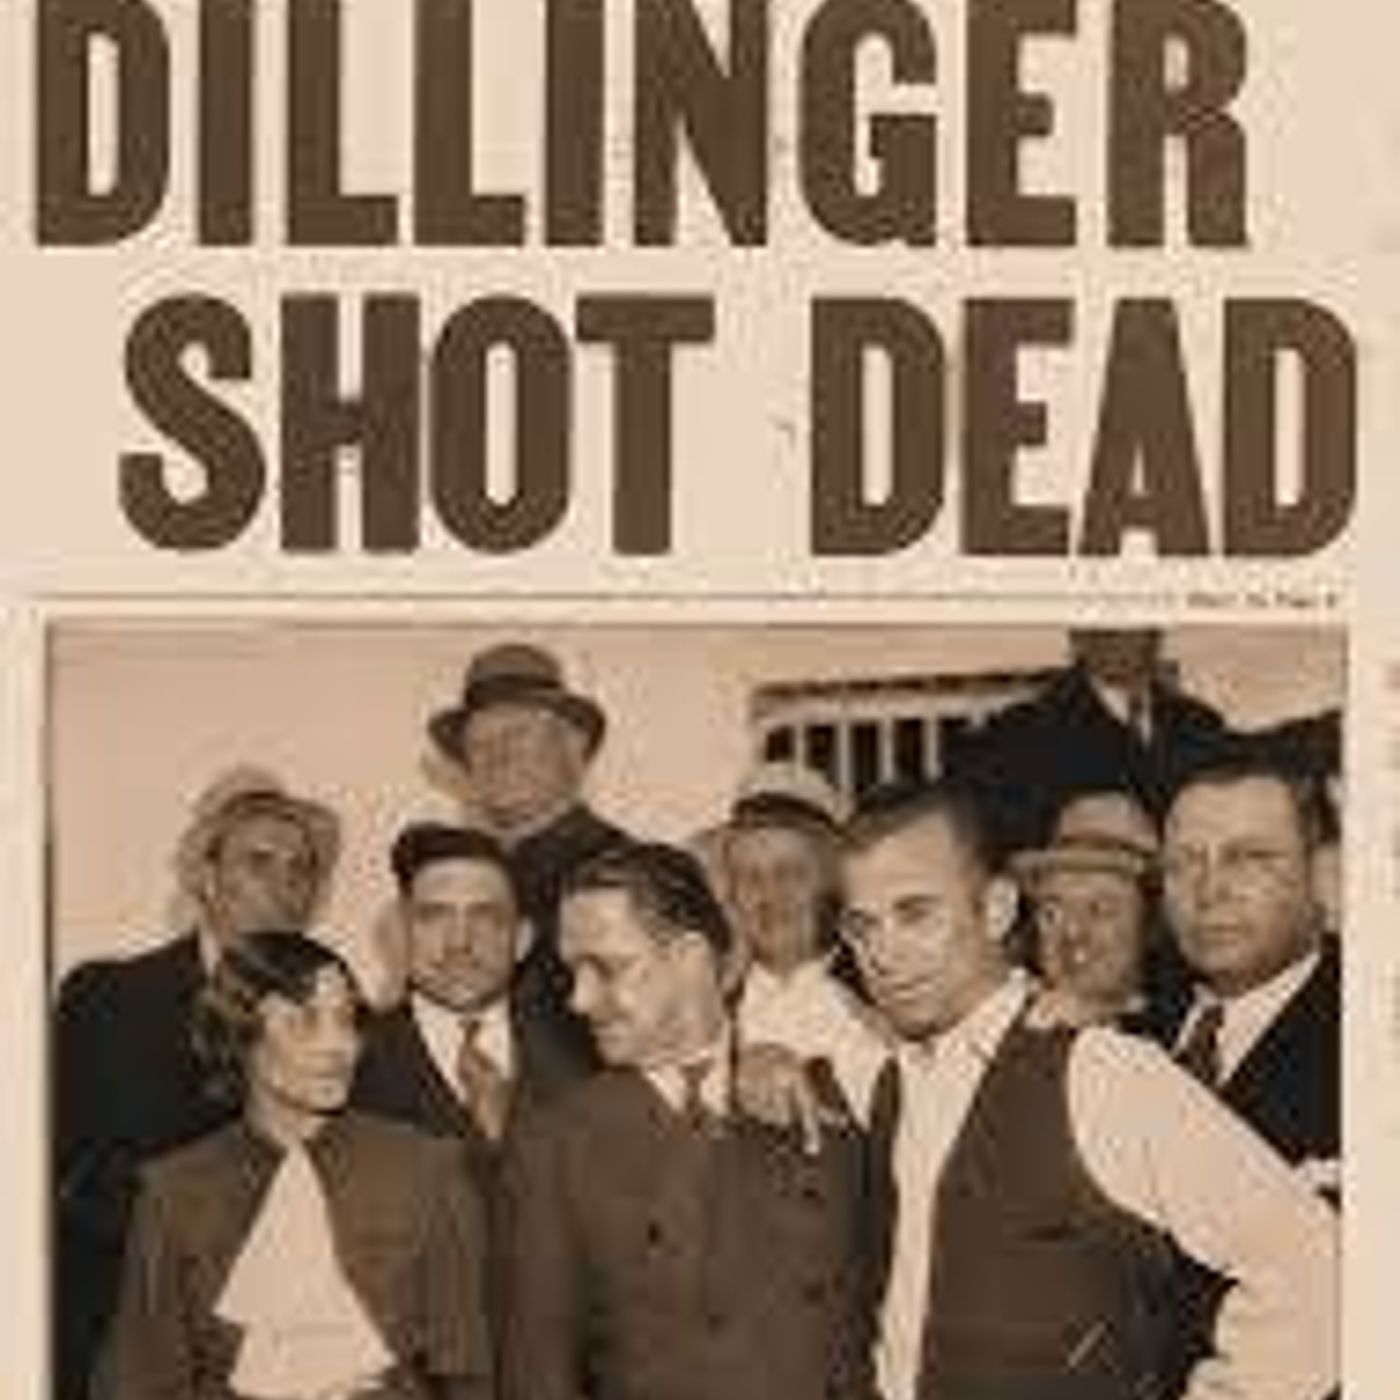 Part 2 of 3 - The Death of John Dillinger